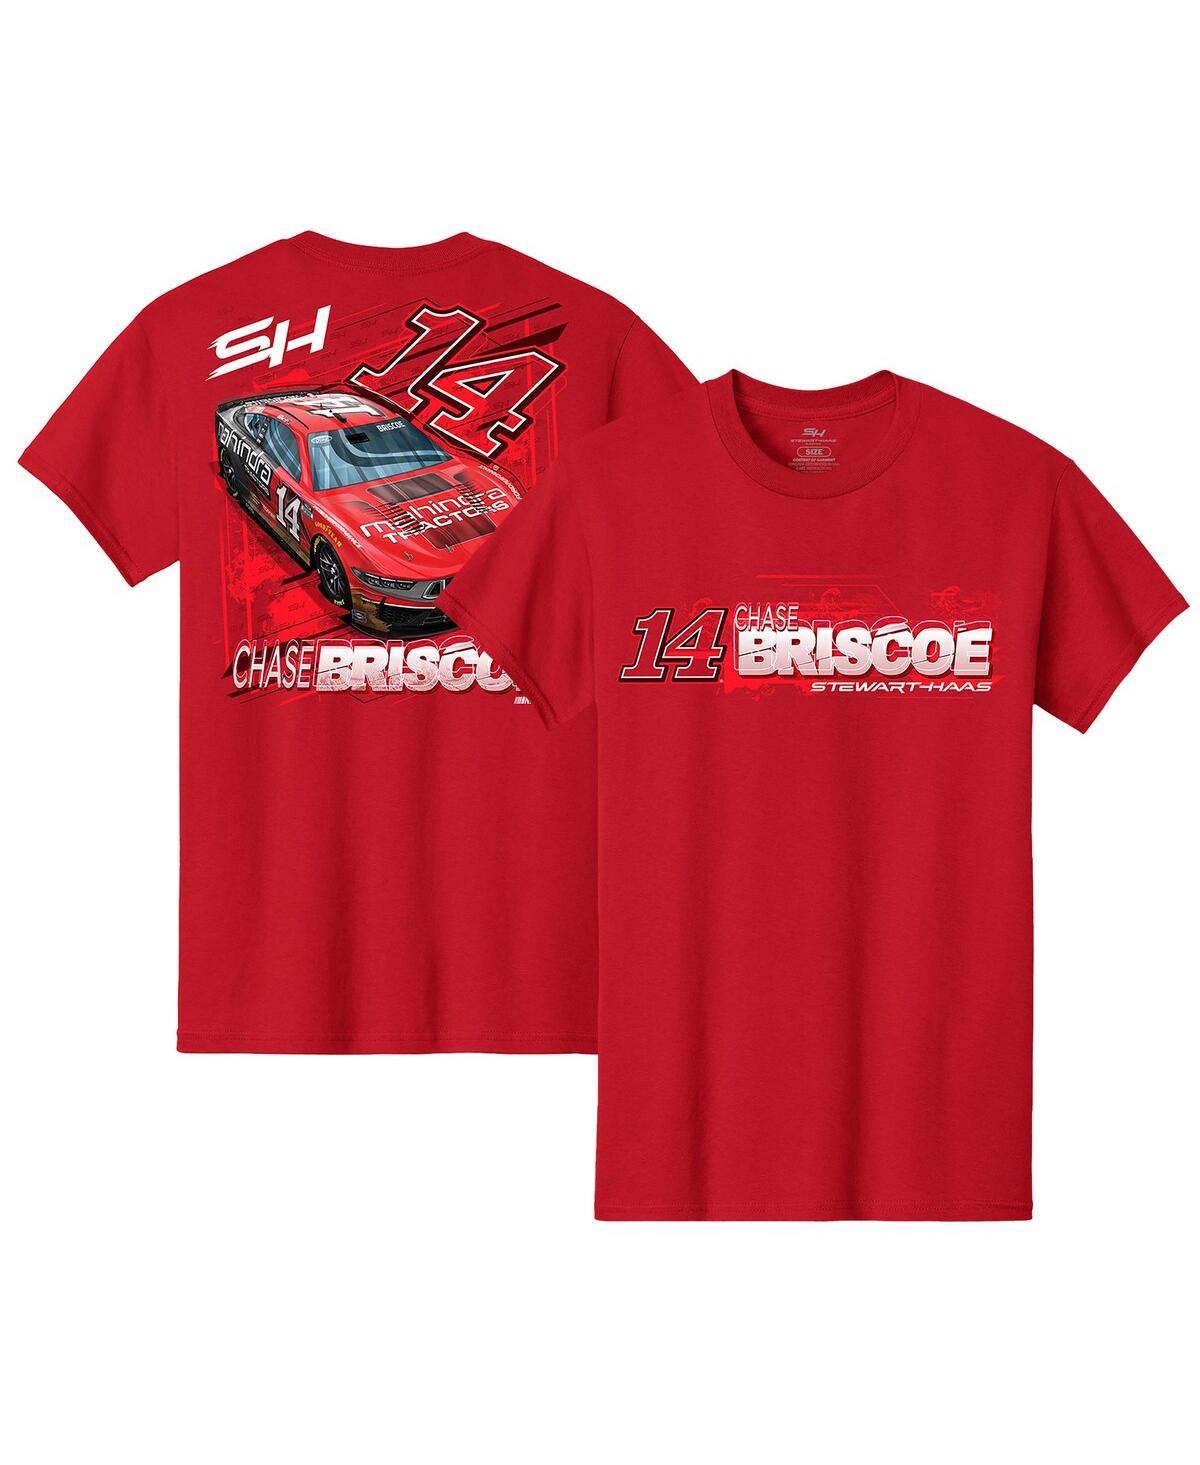 Men's Stewart-Haas Racing Team Collection Red Chase Briscoe Car T-shirt - Red